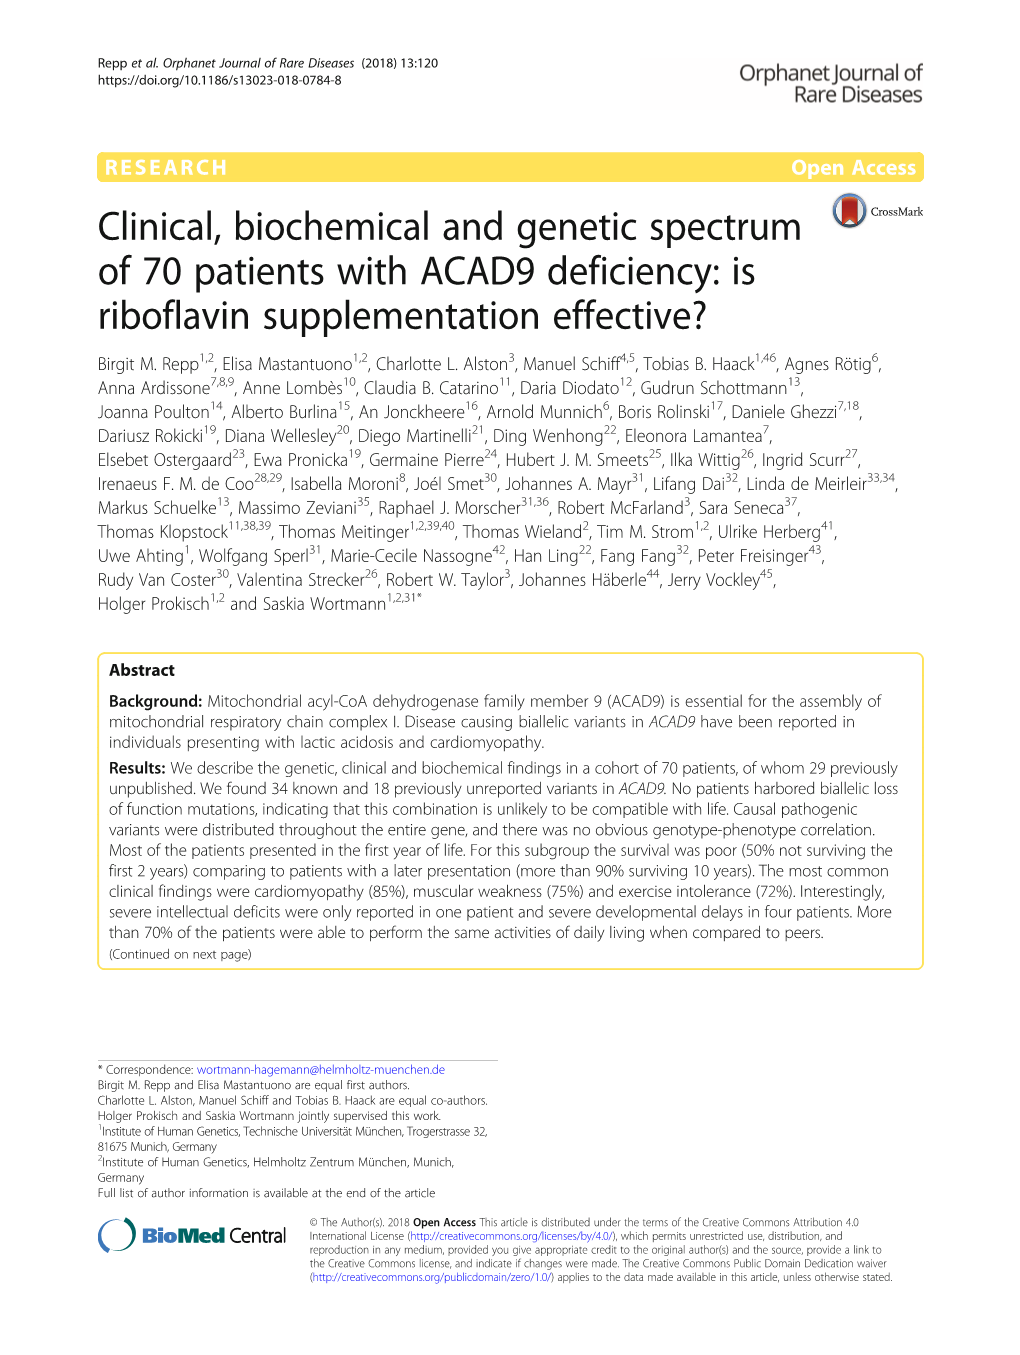 Clinical, Biochemical and Genetic Spectrum of 70 Patients with ACAD9 Deficiency: Is Riboflavin Supplementation Effective? Birgit M